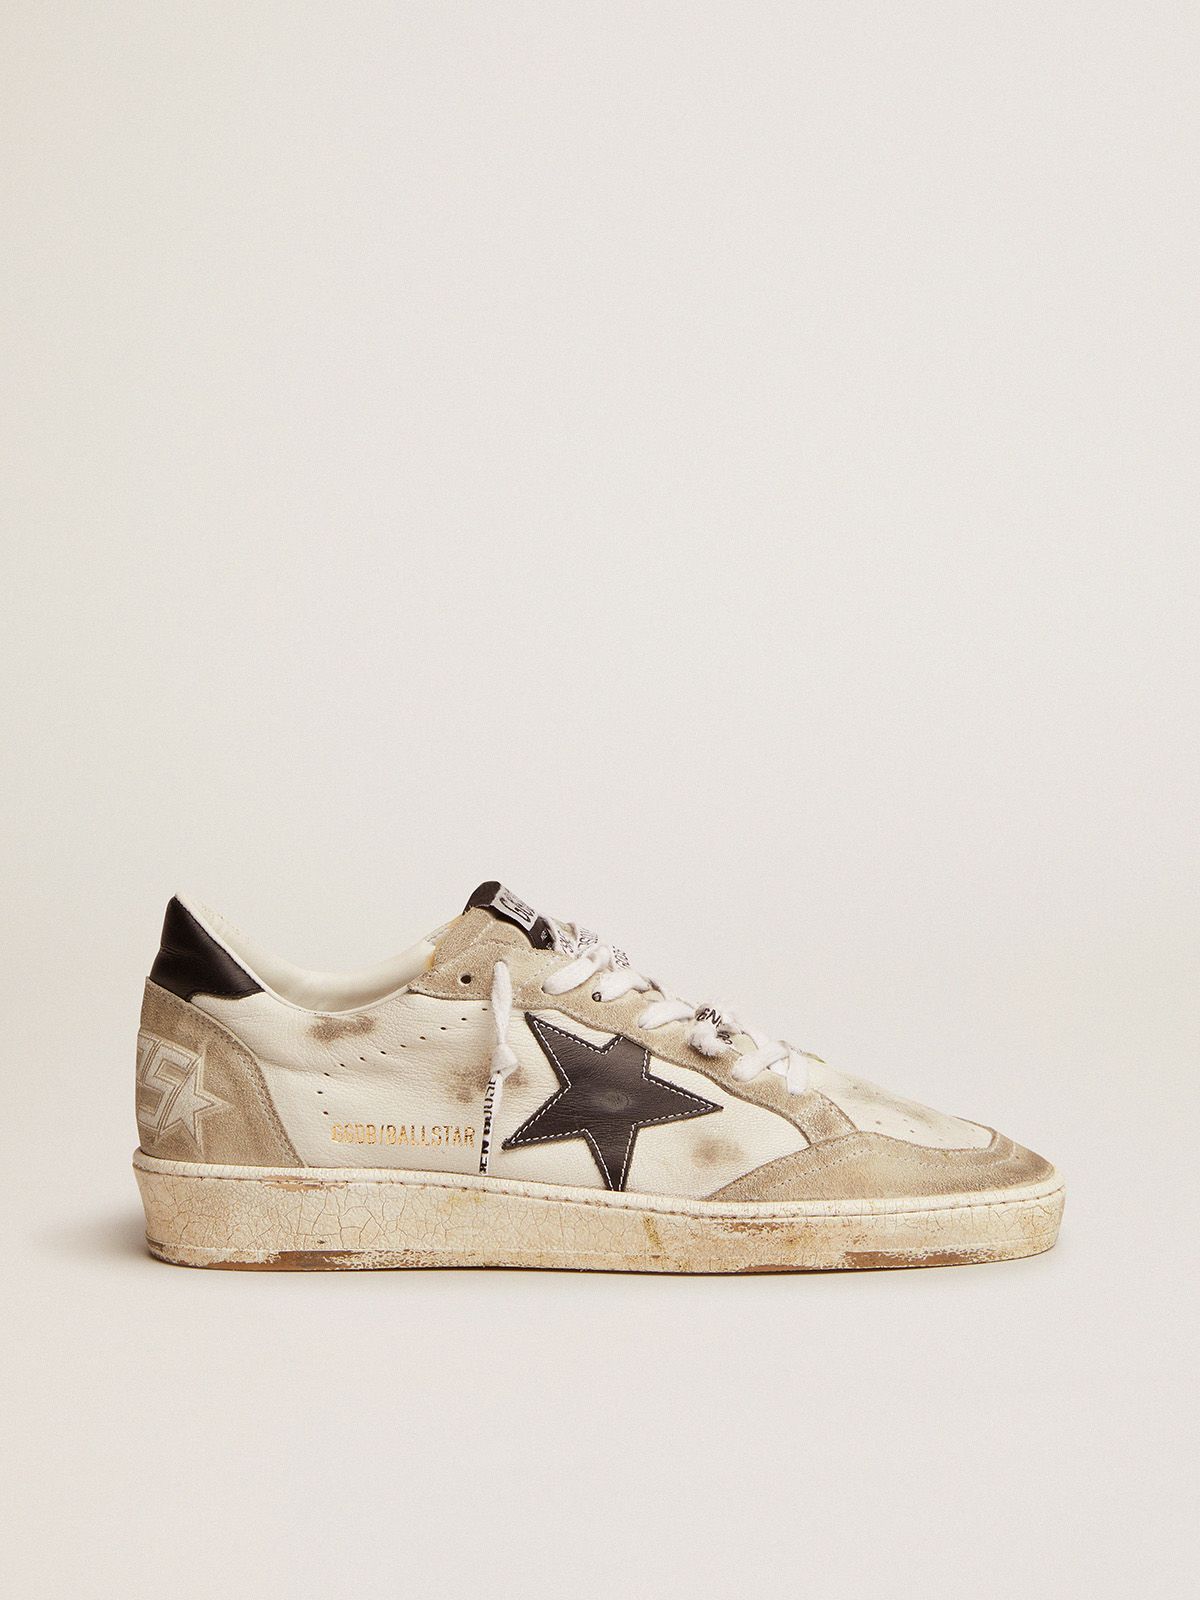 golden goose sneakers with Ball in and detail leather black white Star ice-gray suede